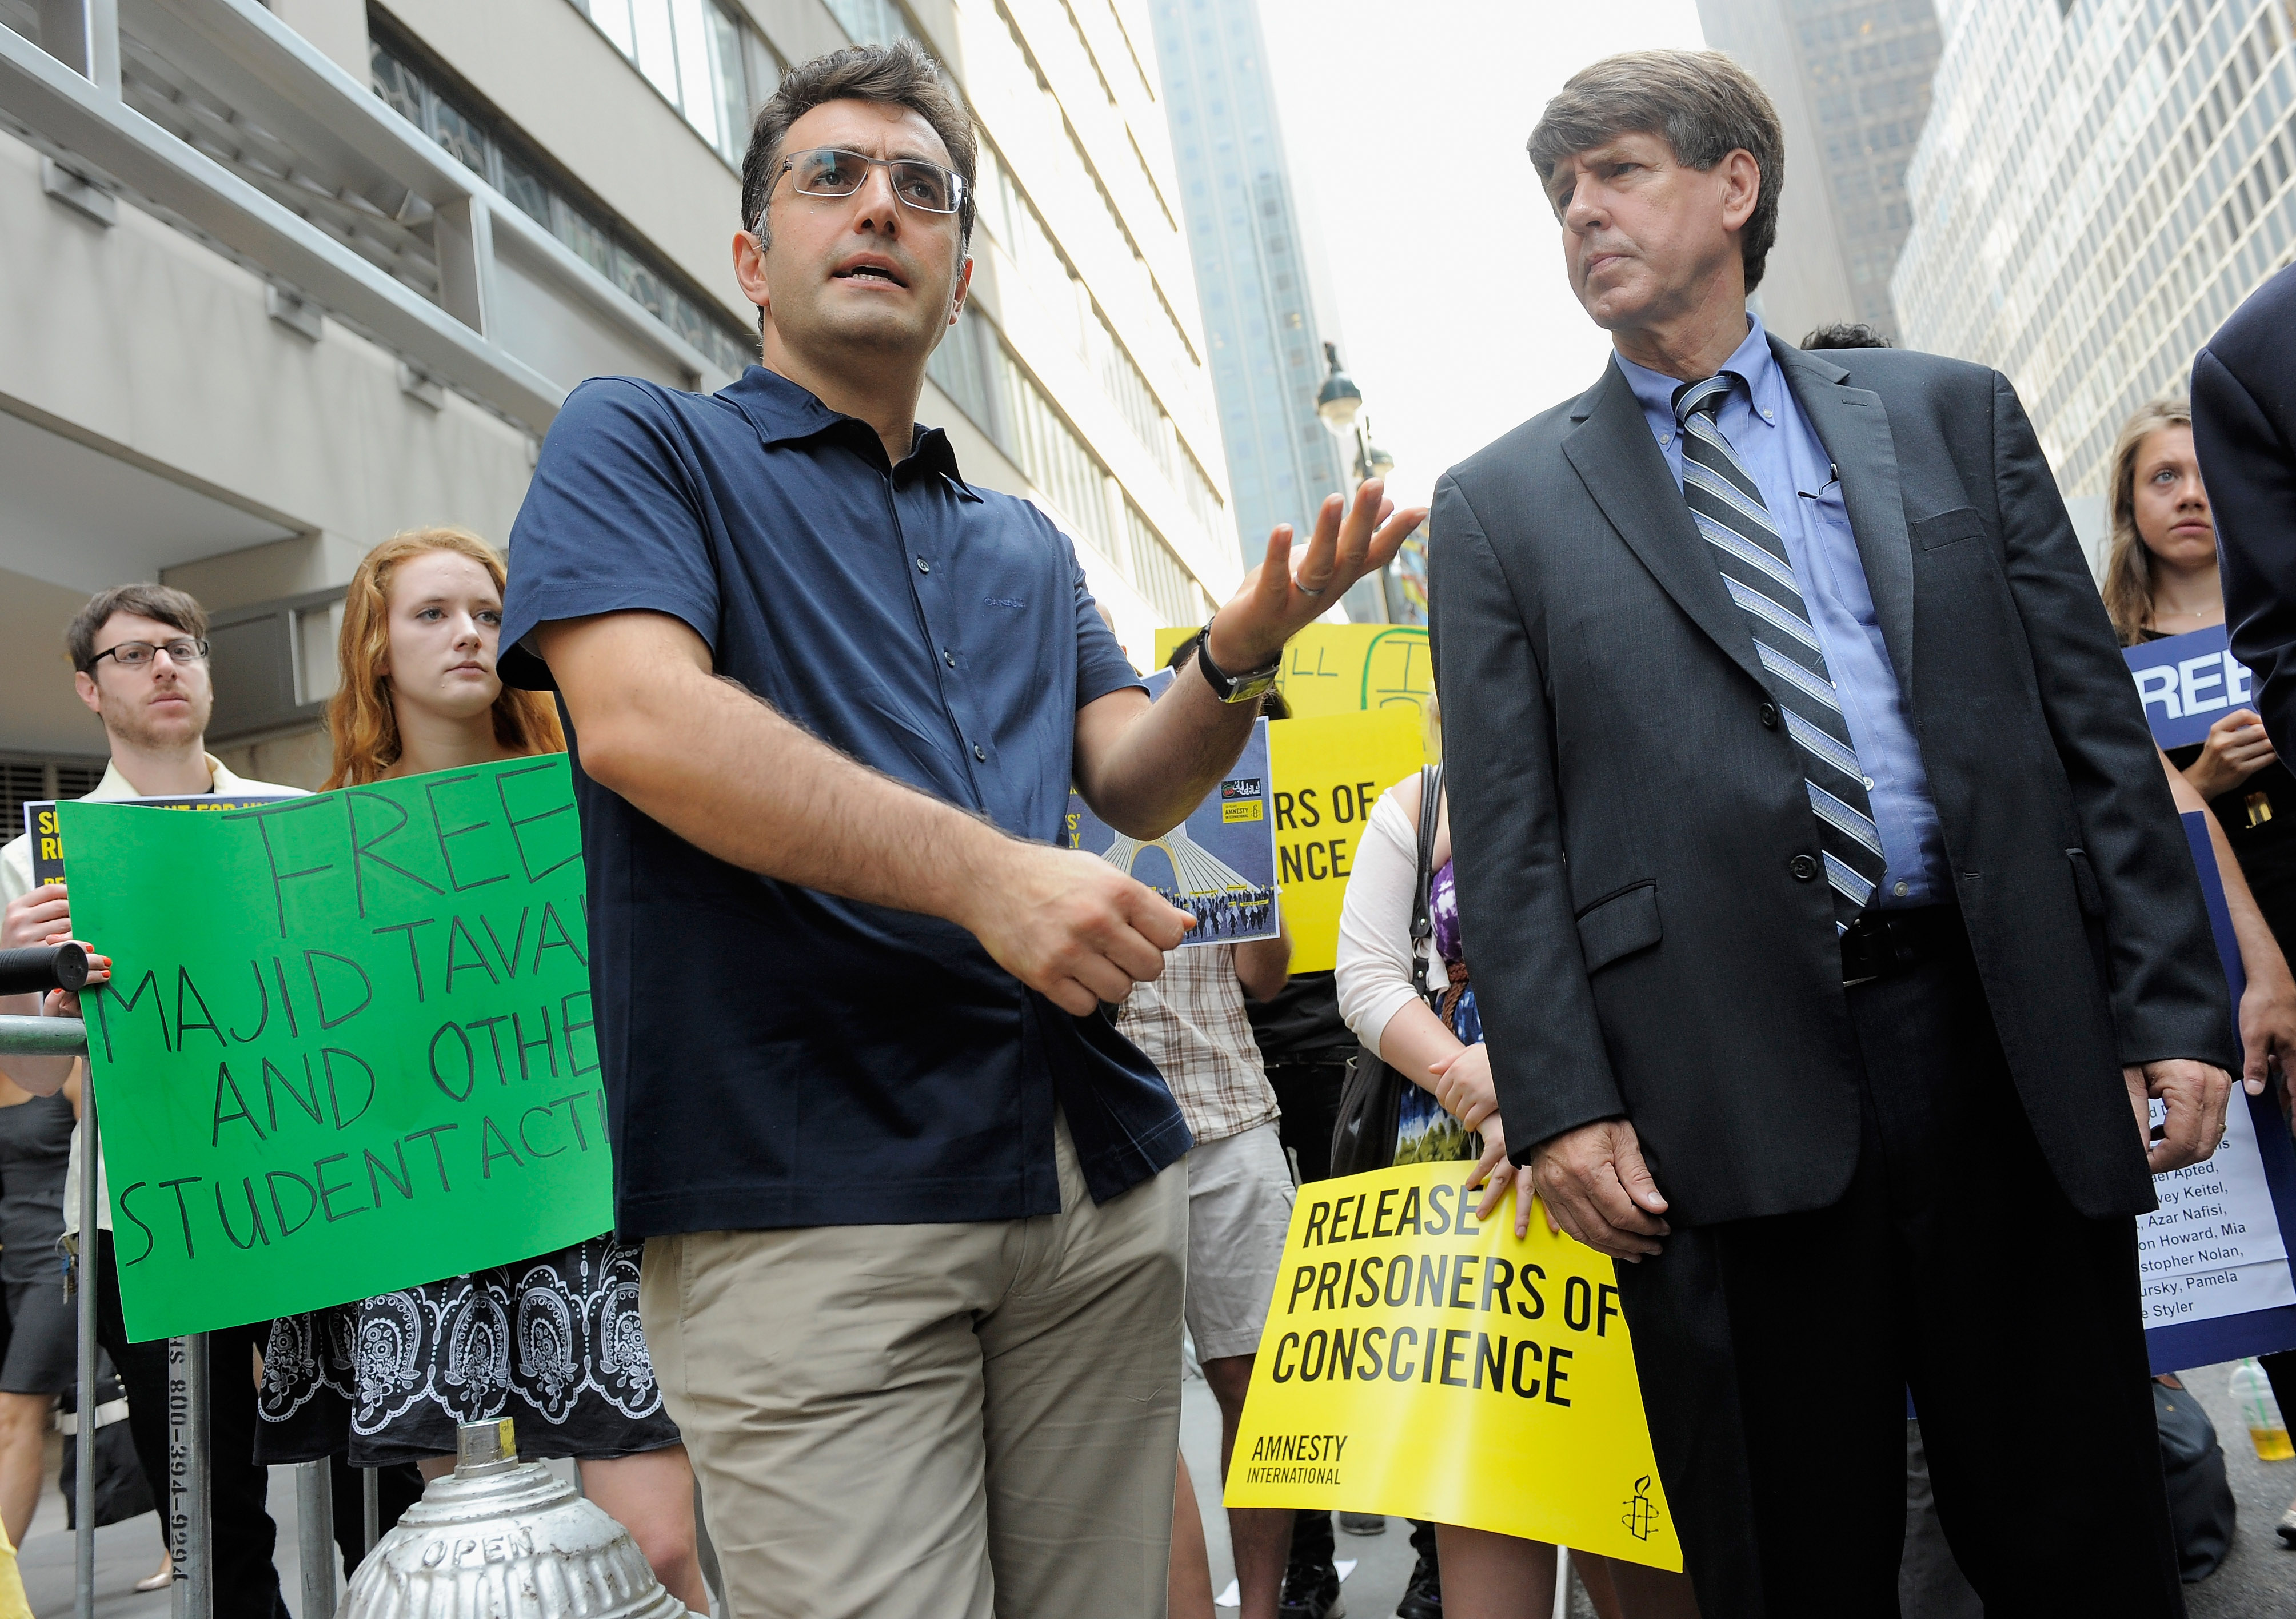 NEW YORK, NY - JUNE 08:  Journalist Maziar Bahari and Head of Amnesty International Larry Cox speak  during a rally calling for Iranian officials to reverse prison sentence of Jafar Panahi and Mohammad Rasoulof on June 8, 2011 in New York City.  (Photo by Jemal Countess/Getty Images)